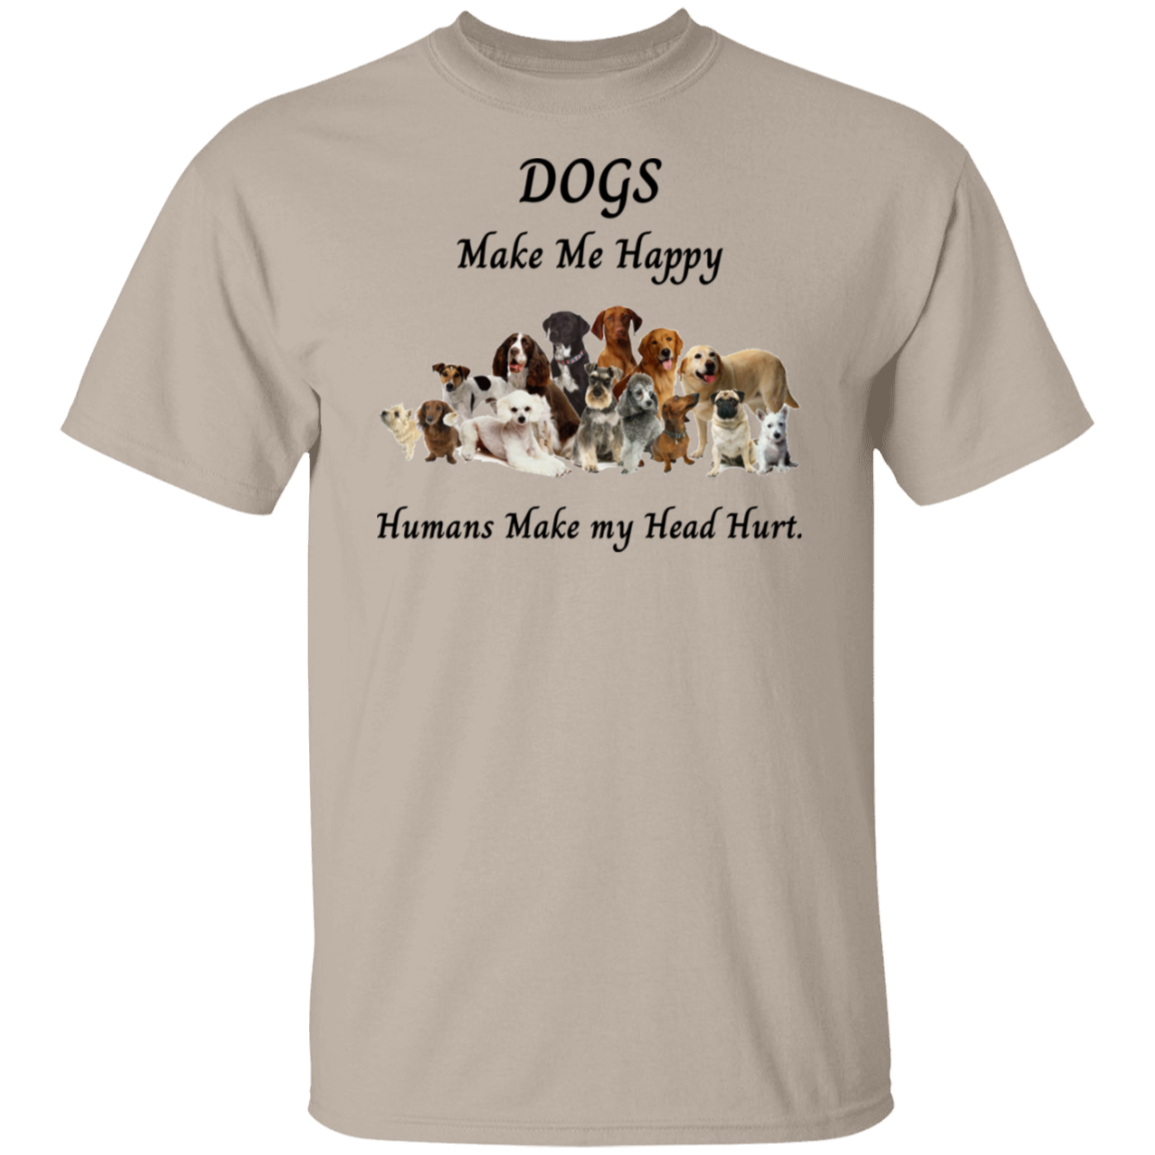 Dogs Make Me Happy and Humans make my head hurt T-Shirt